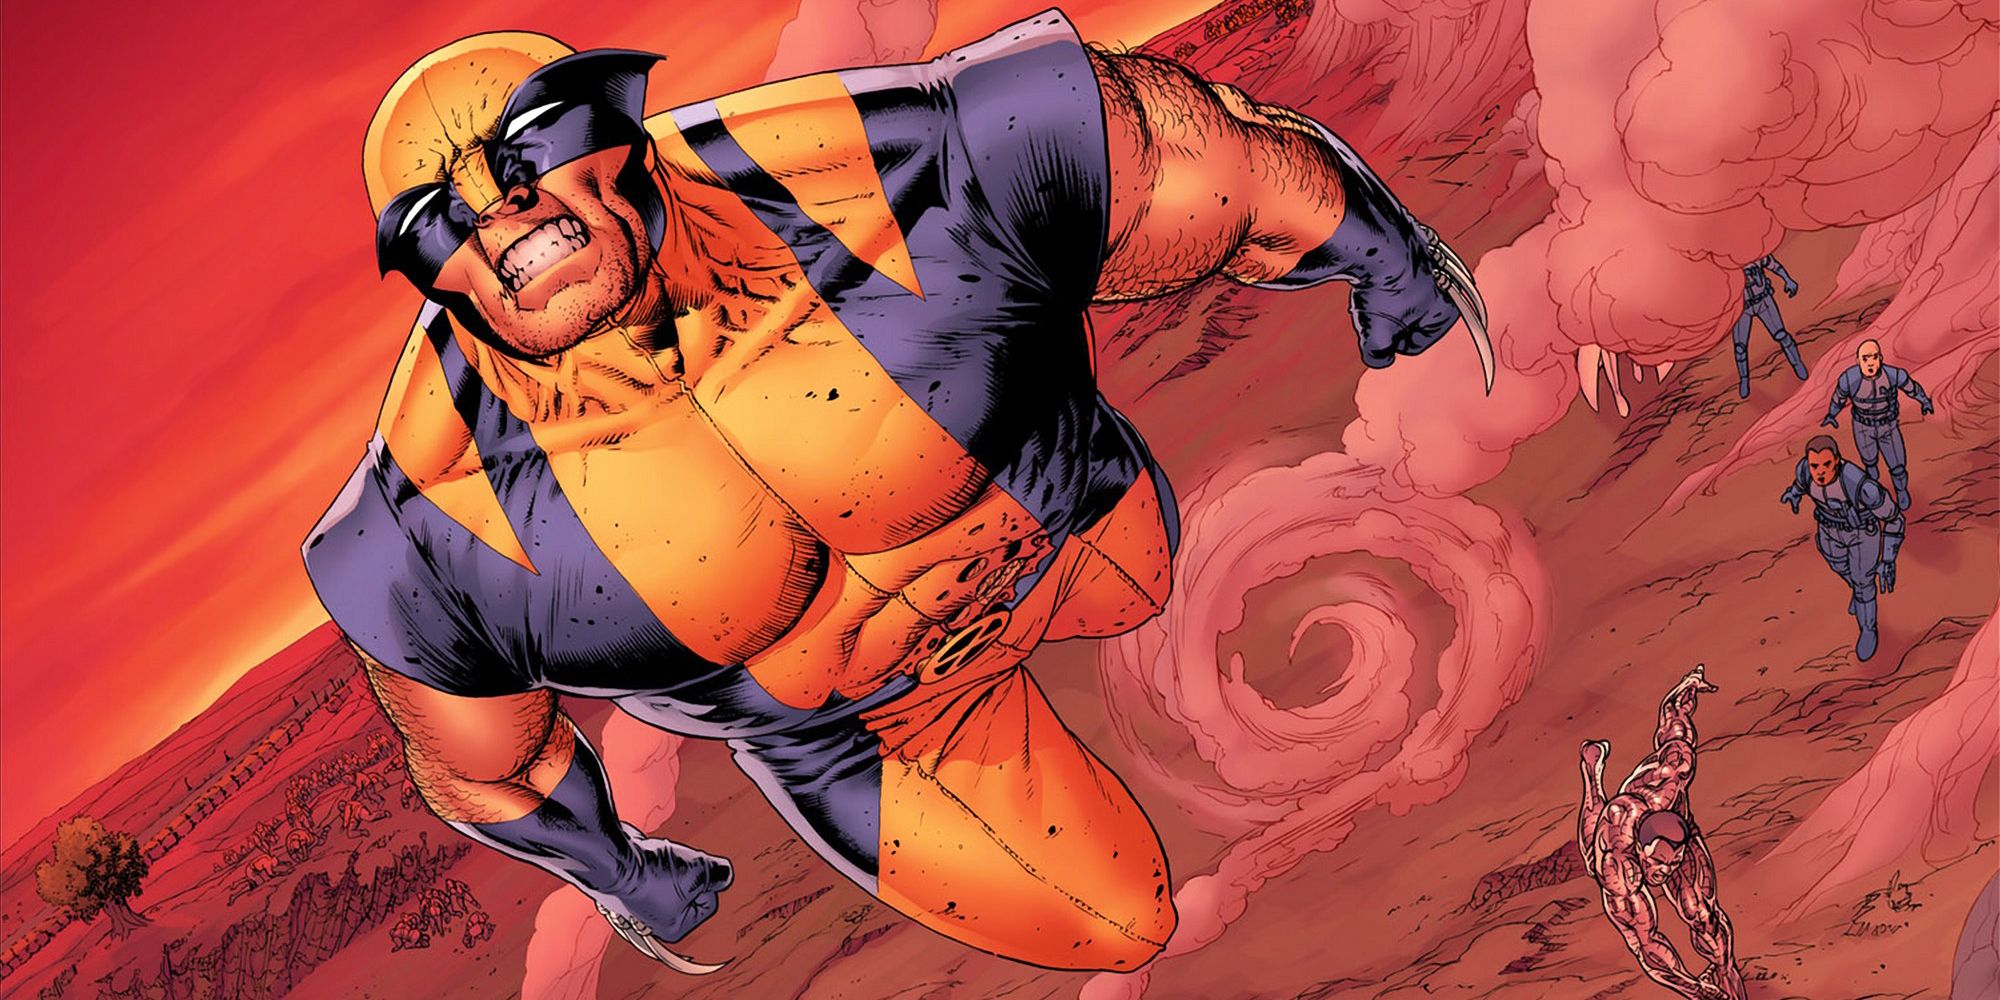 Wolverine is hurled above the fray in Astonishing X-Men